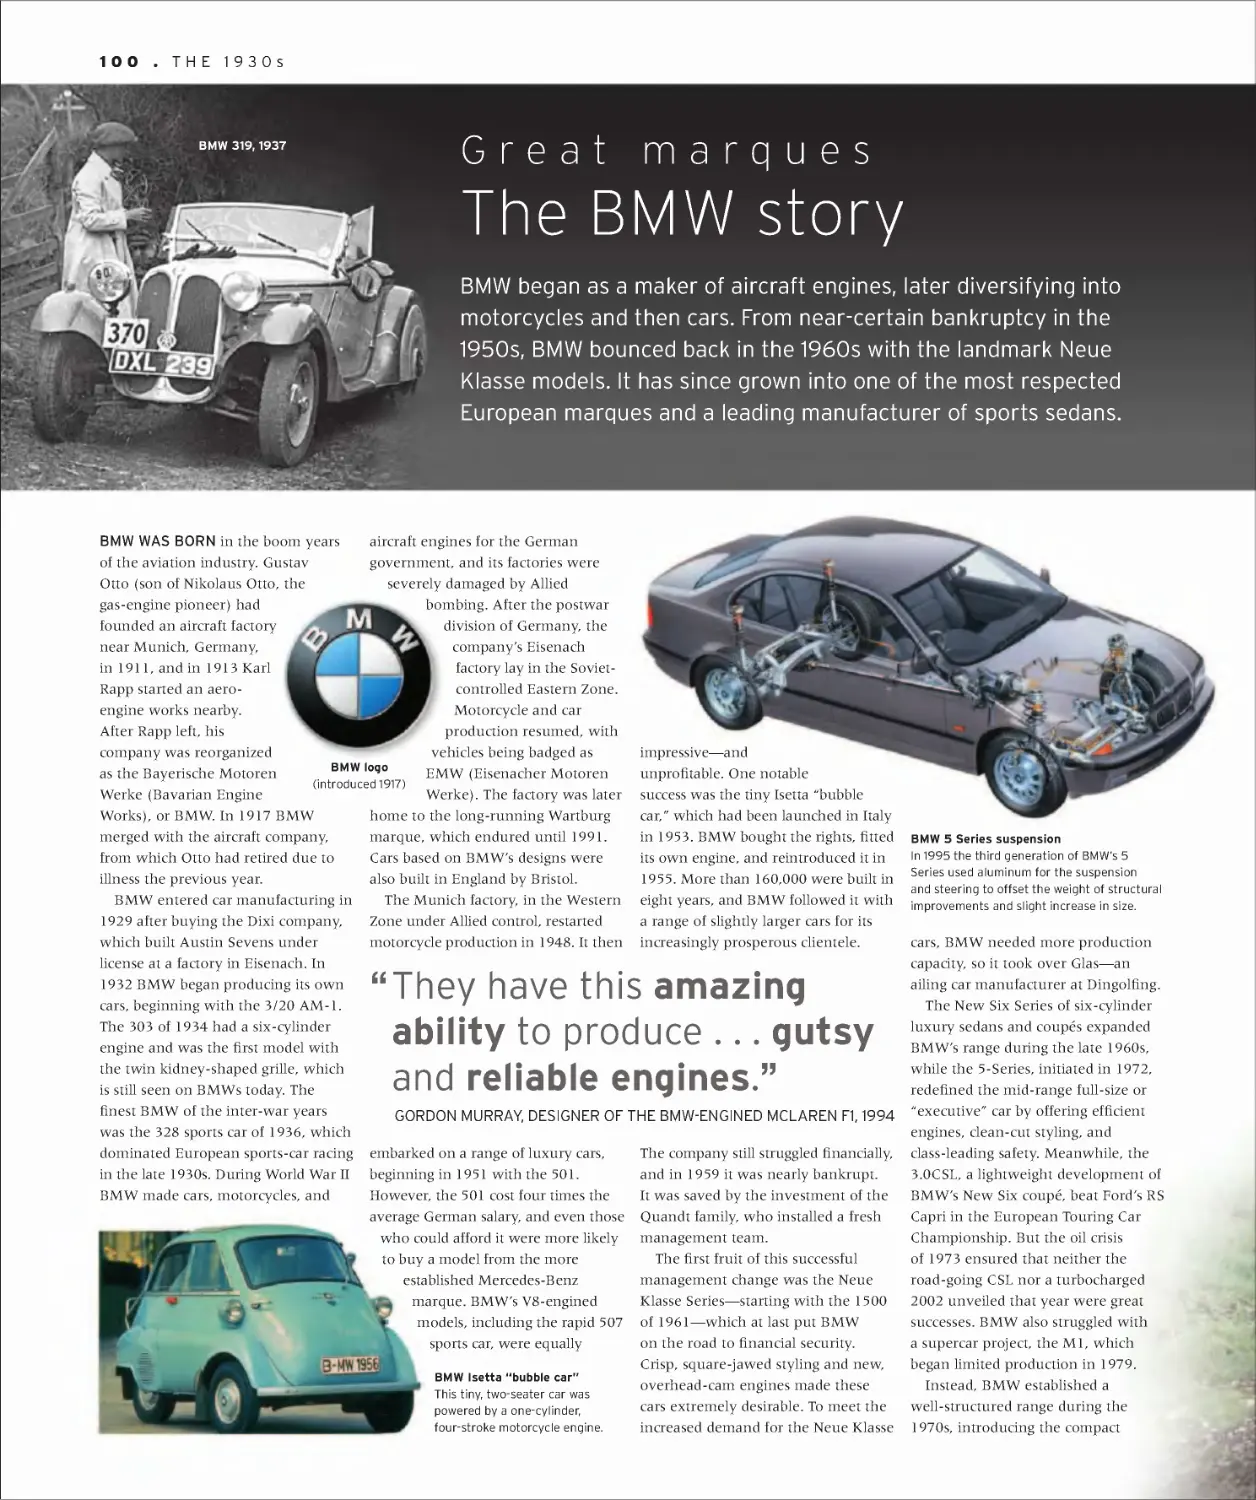 Great marques: The BMW story 100